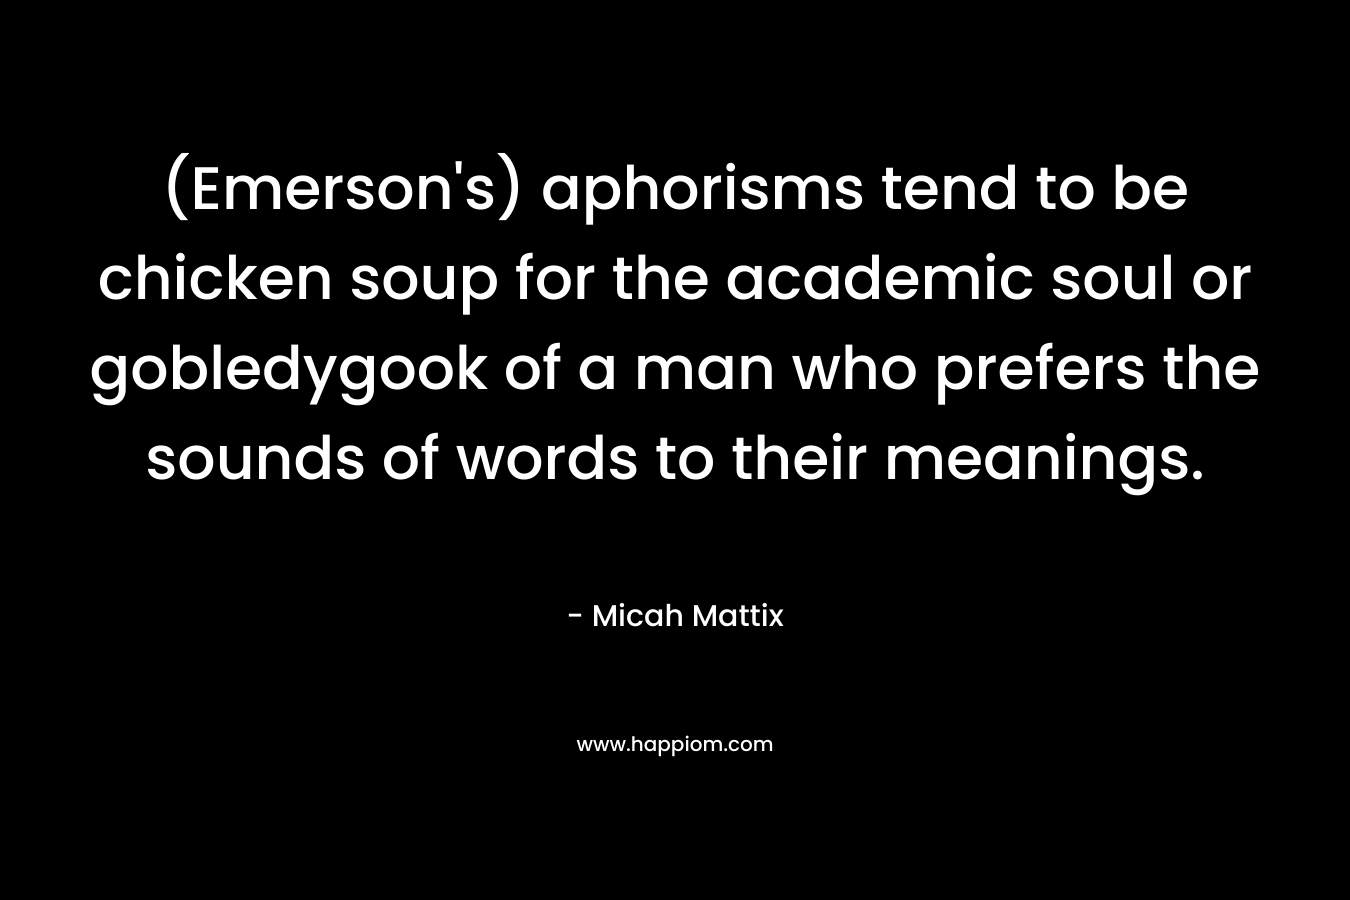 (Emerson’s) aphorisms tend to be chicken soup for the academic soul or gobledygook of a man who prefers the sounds of words to their meanings. – Micah Mattix